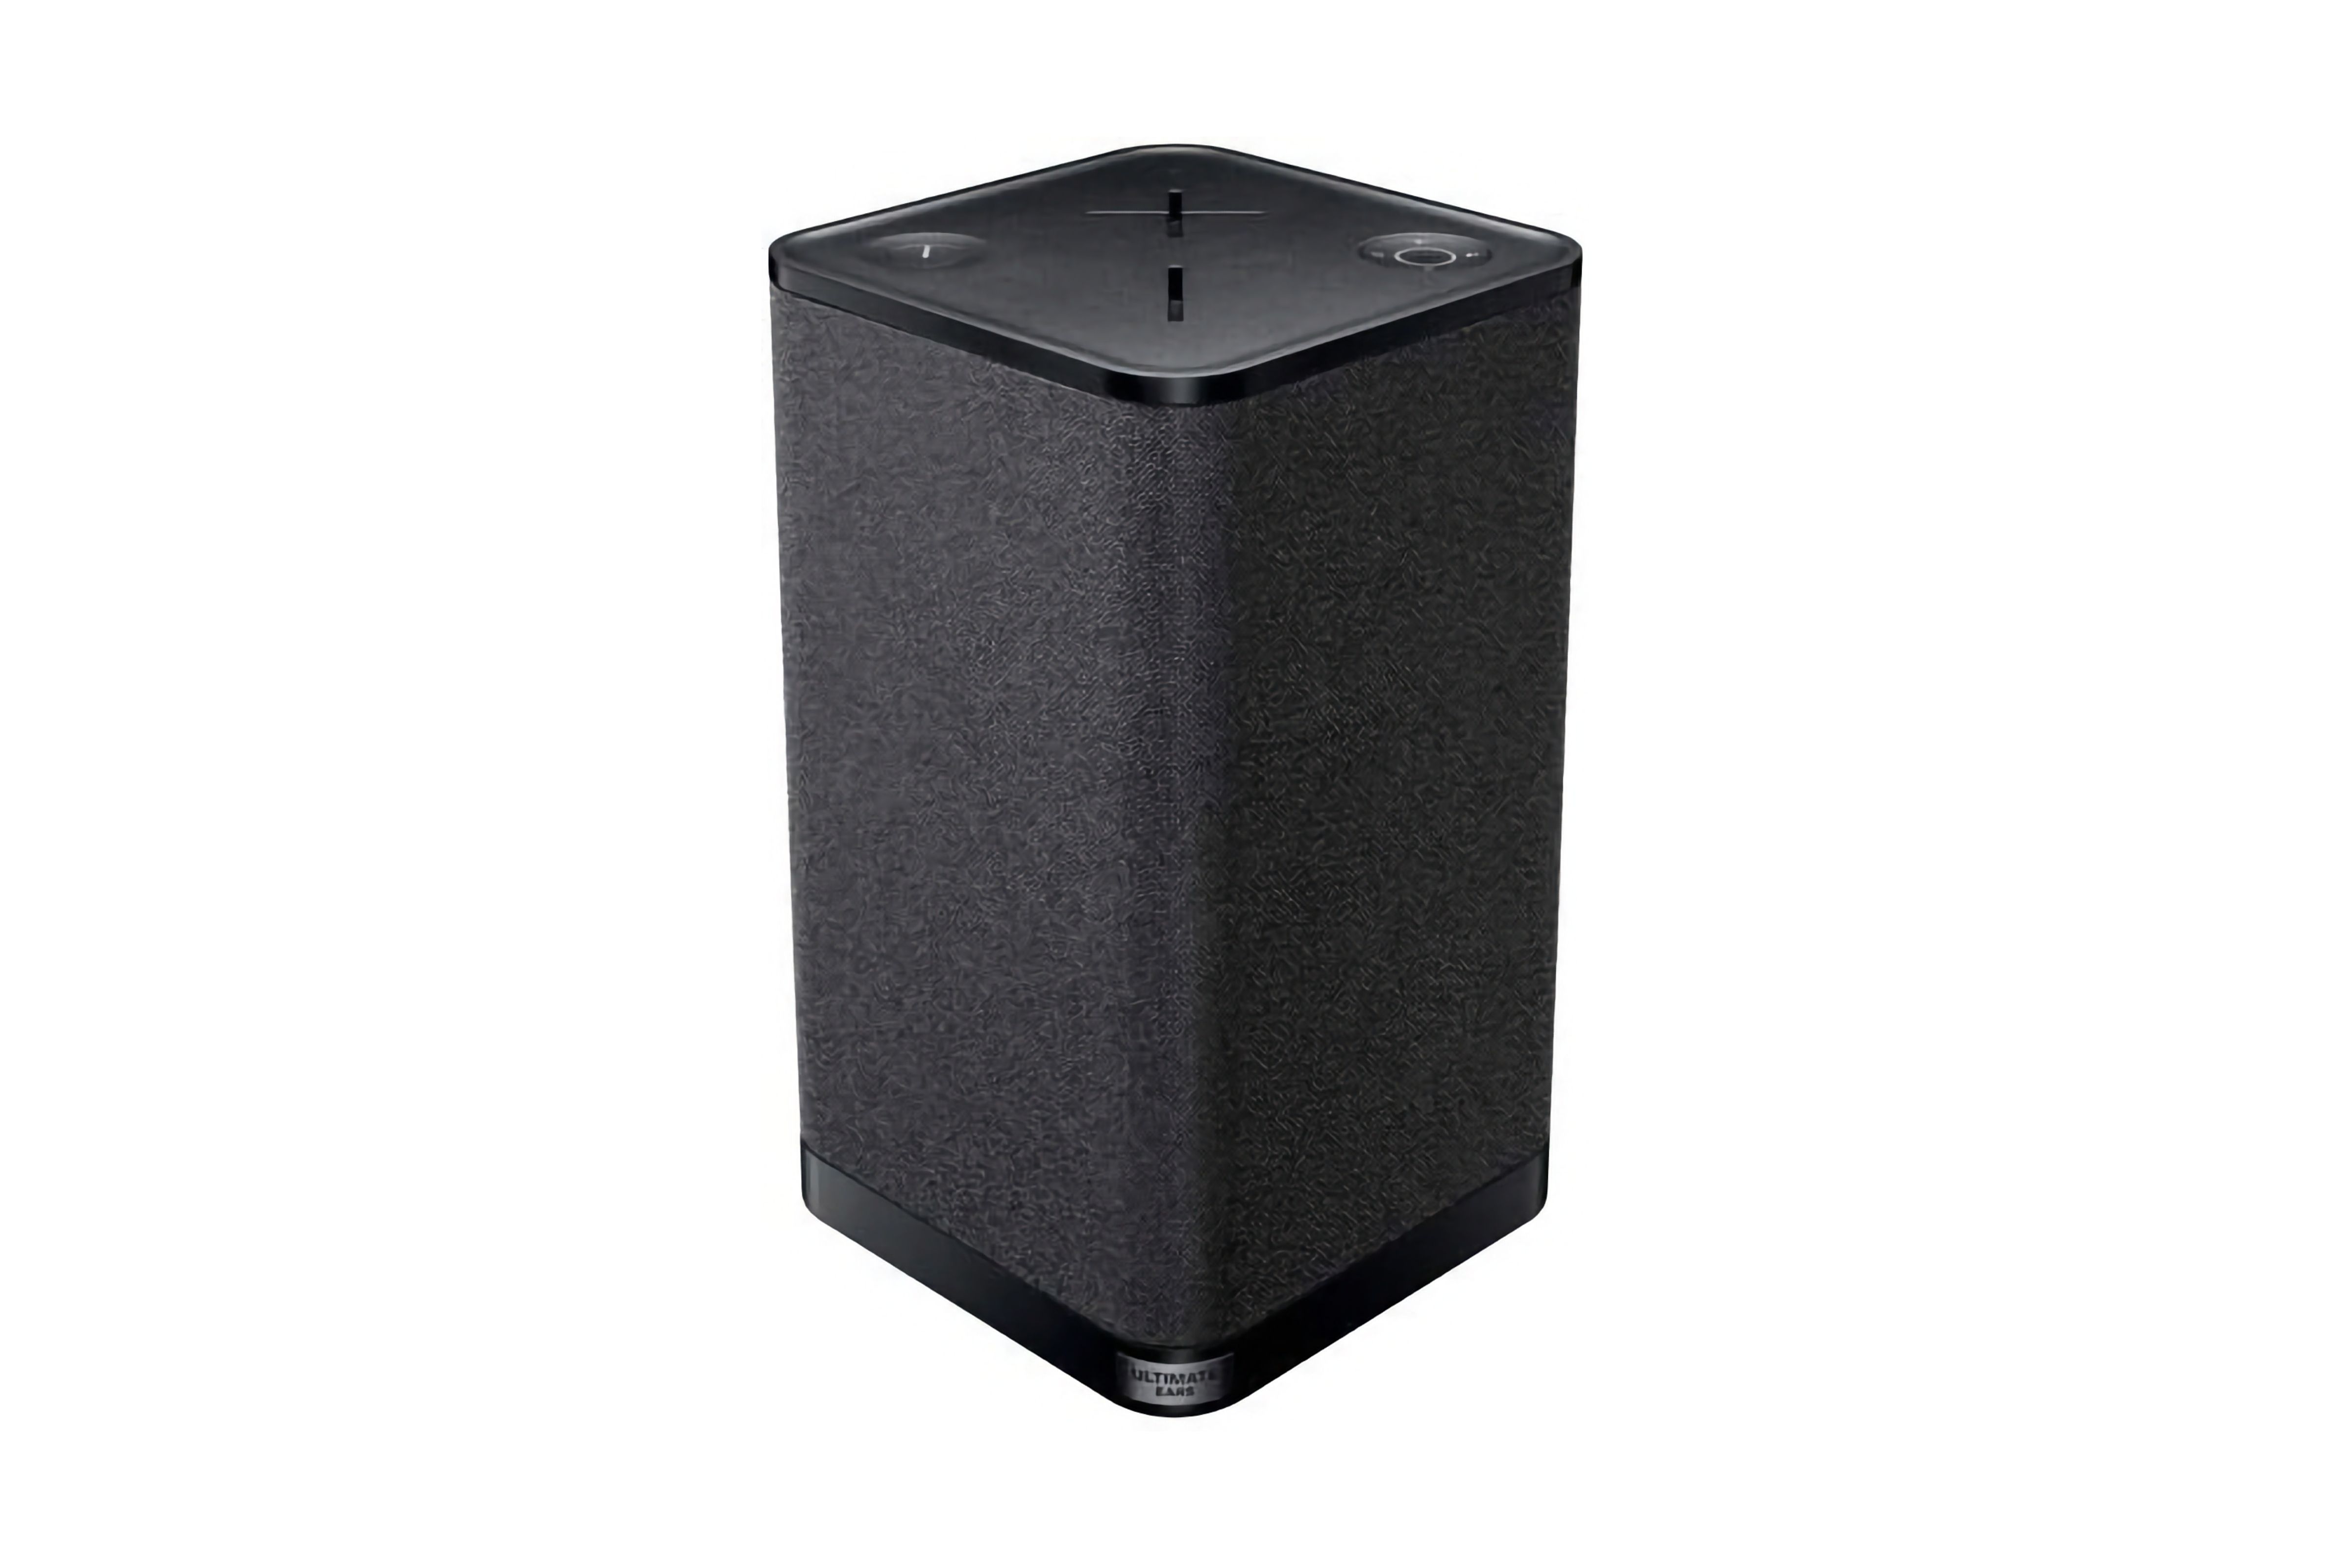 A black rectangular party speaker with large buttons on the top.